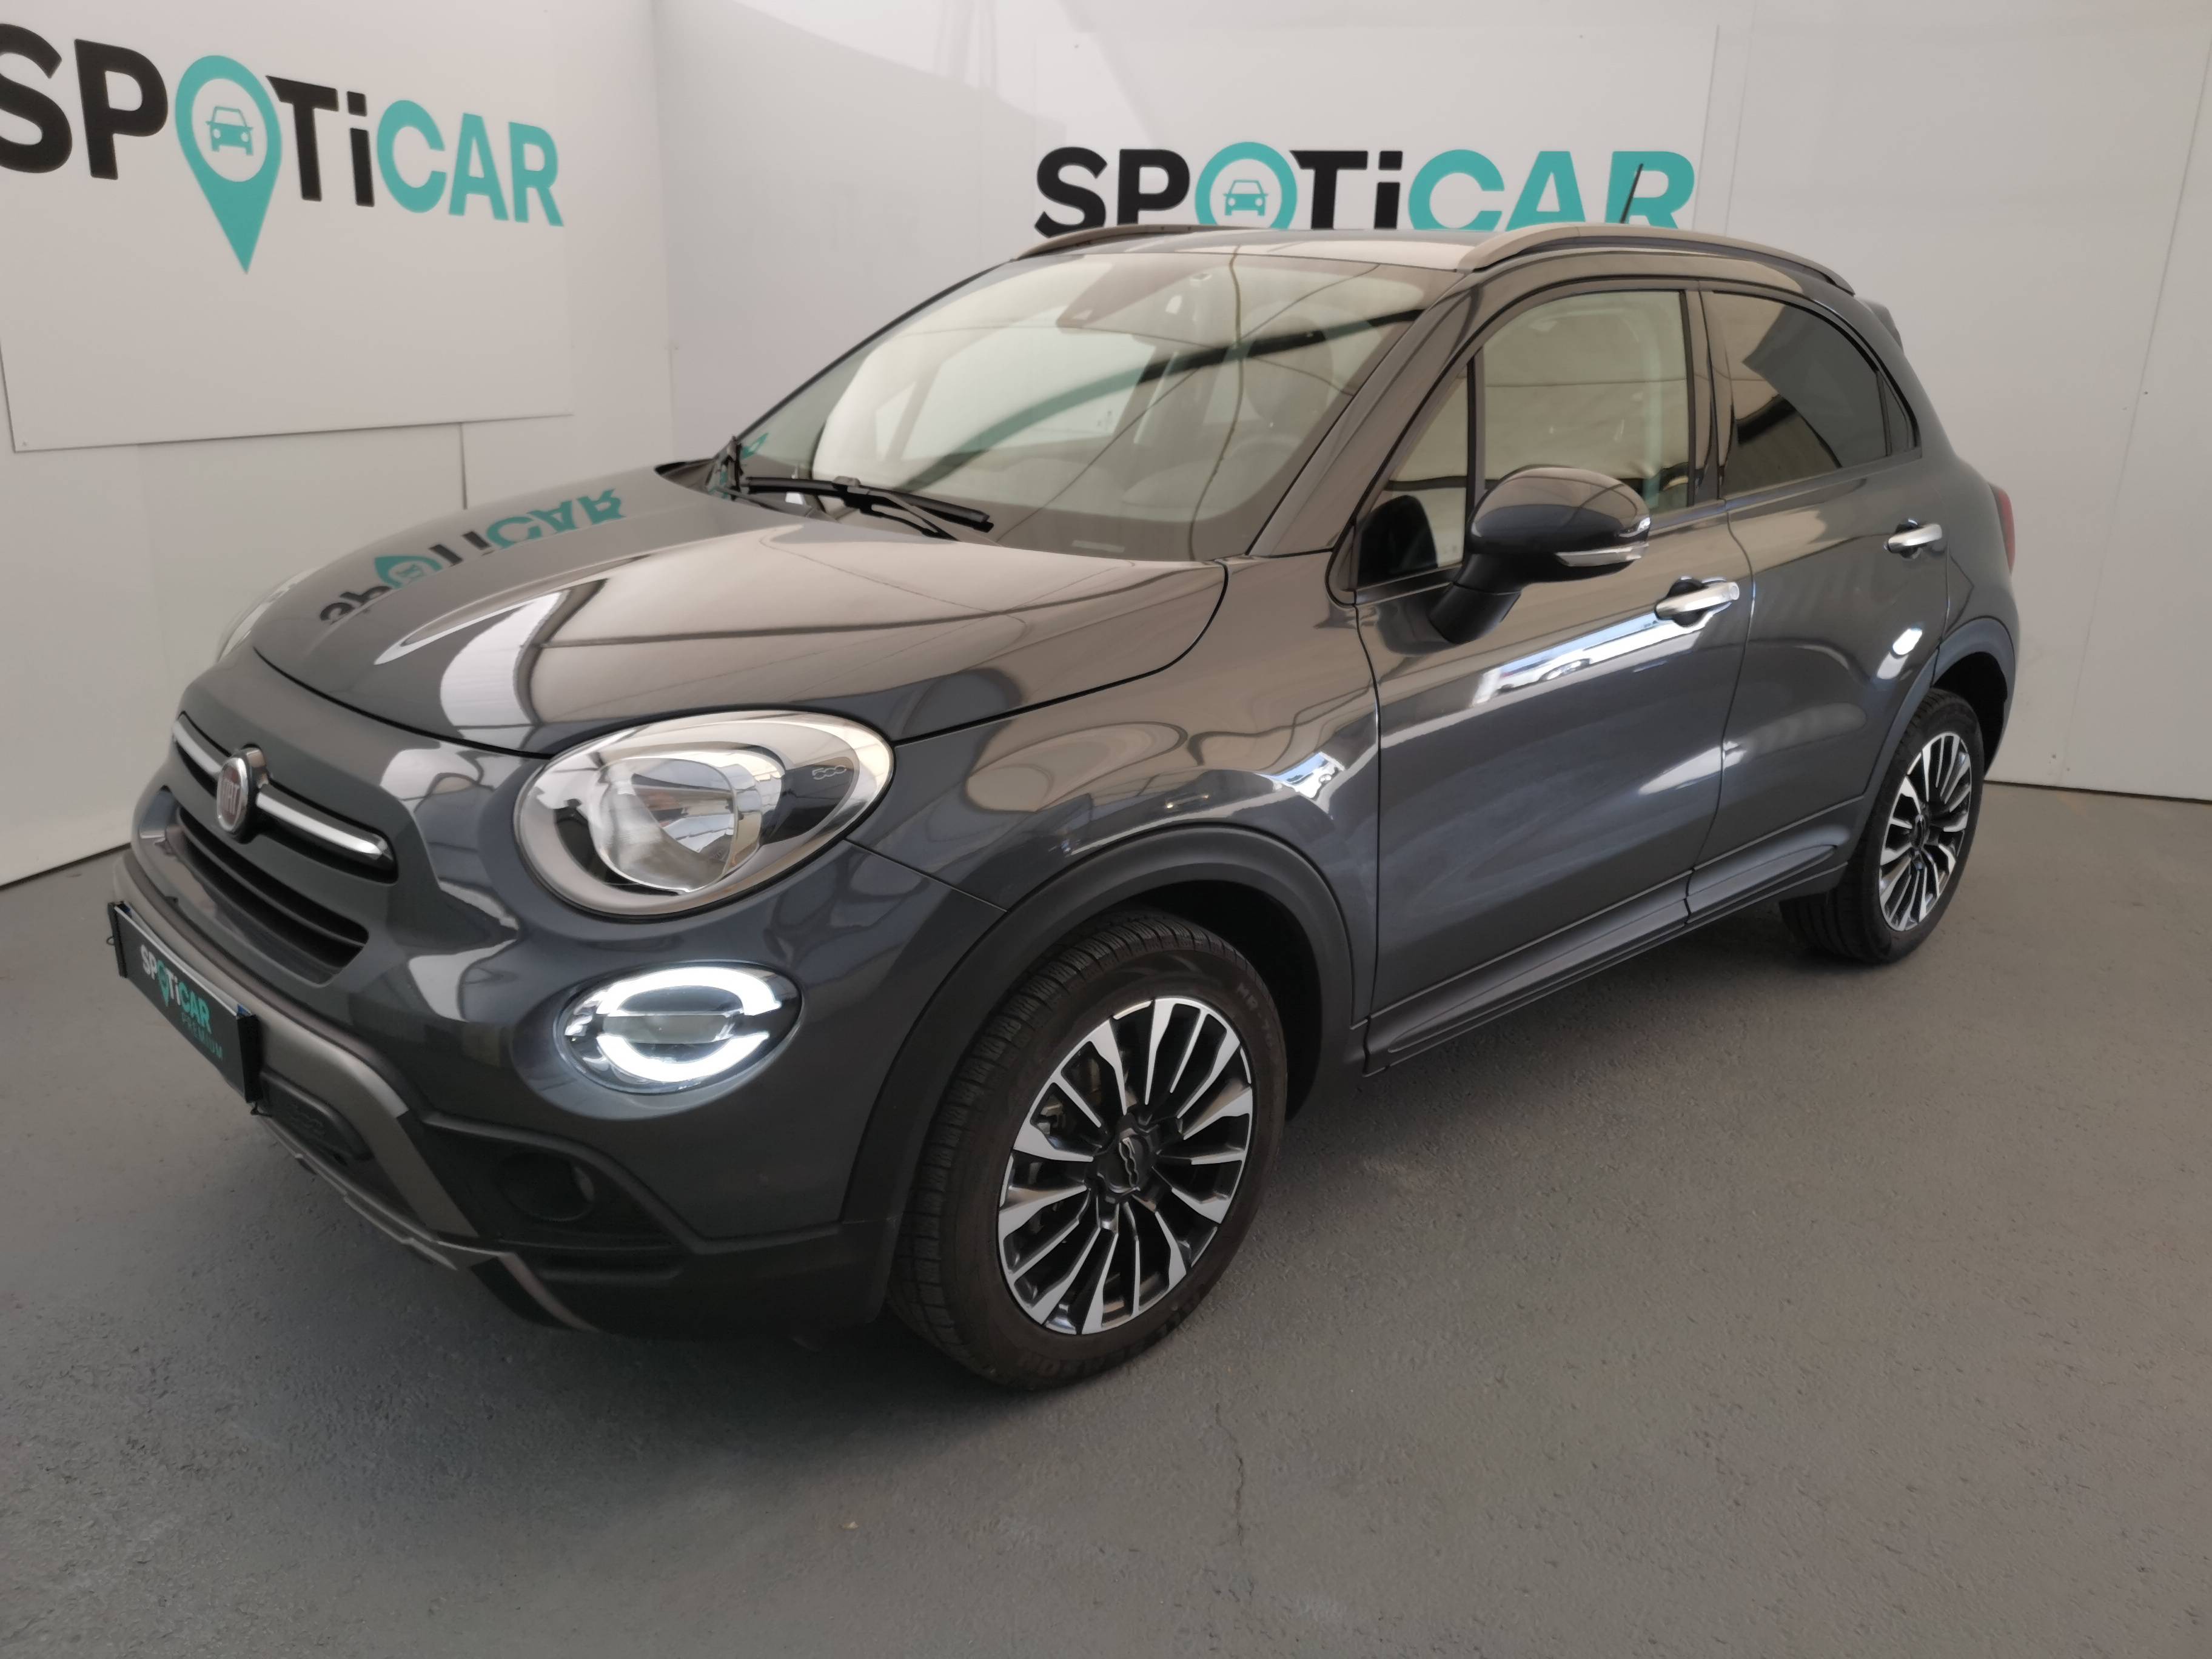 FIAT 500X | 500X 1.0 FireFly Turbo T3 120 ch occasion - Peugeot Cavaillon